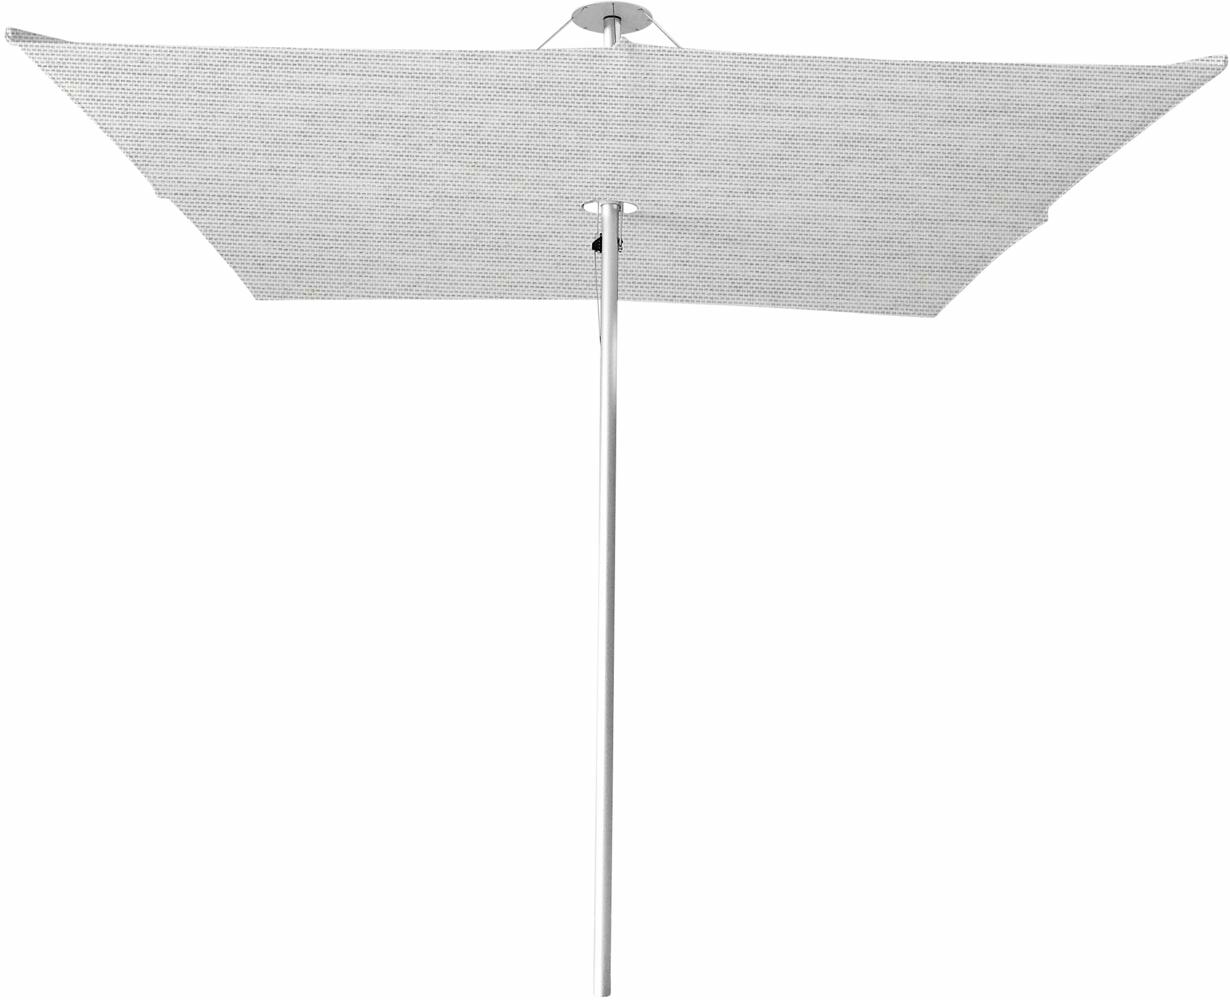 Infina center post umbrella, 3 m square, with frame in Aluminum and Colorum Marble canopy.